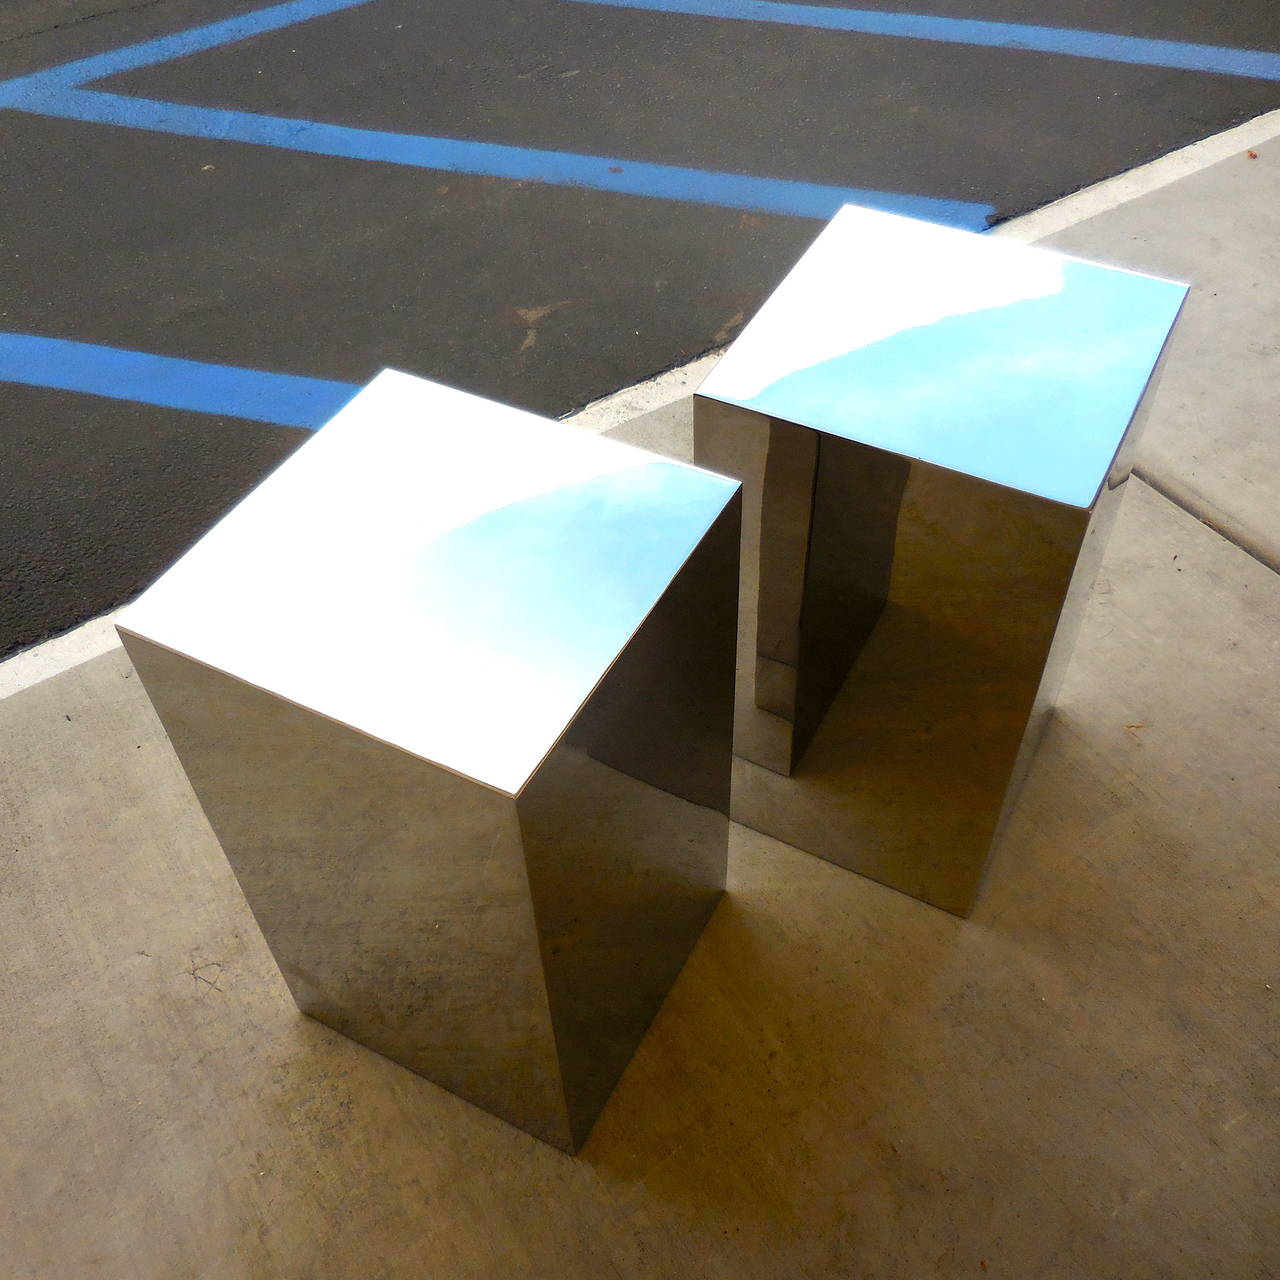 Late 20th Century Sleek Pair of Mirror Polished 1970s Stainless Steel Occasional Tables